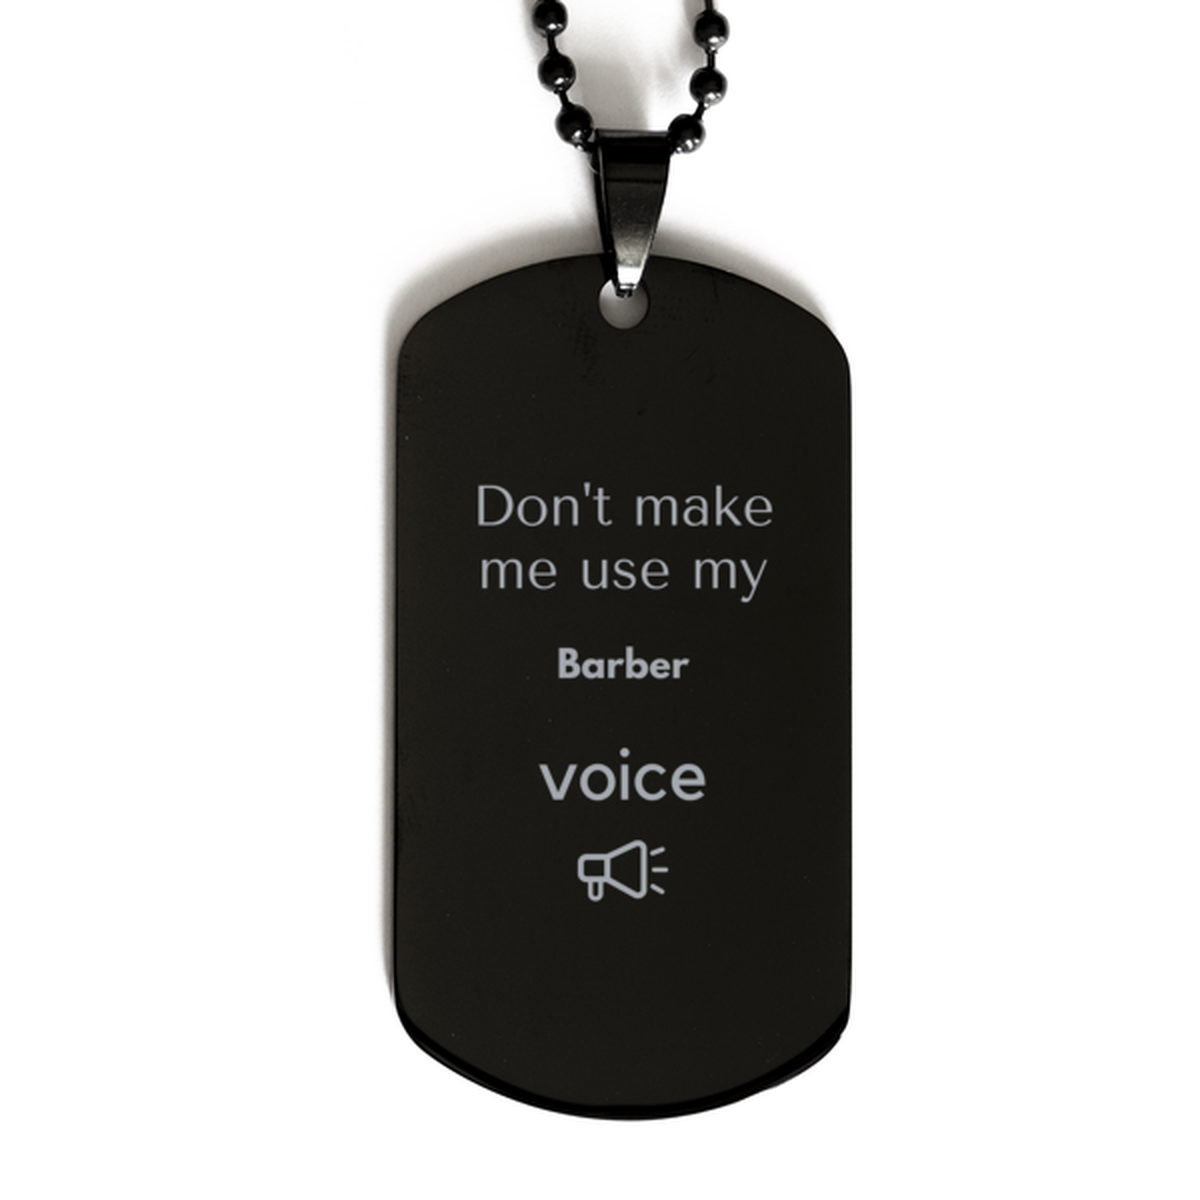 Don't make me use my Barber voice, Sarcasm Barber Gifts, Christmas Barber Black Dog Tag Birthday Unique Gifts For Barber Coworkers, Men, Women, Colleague, Friends